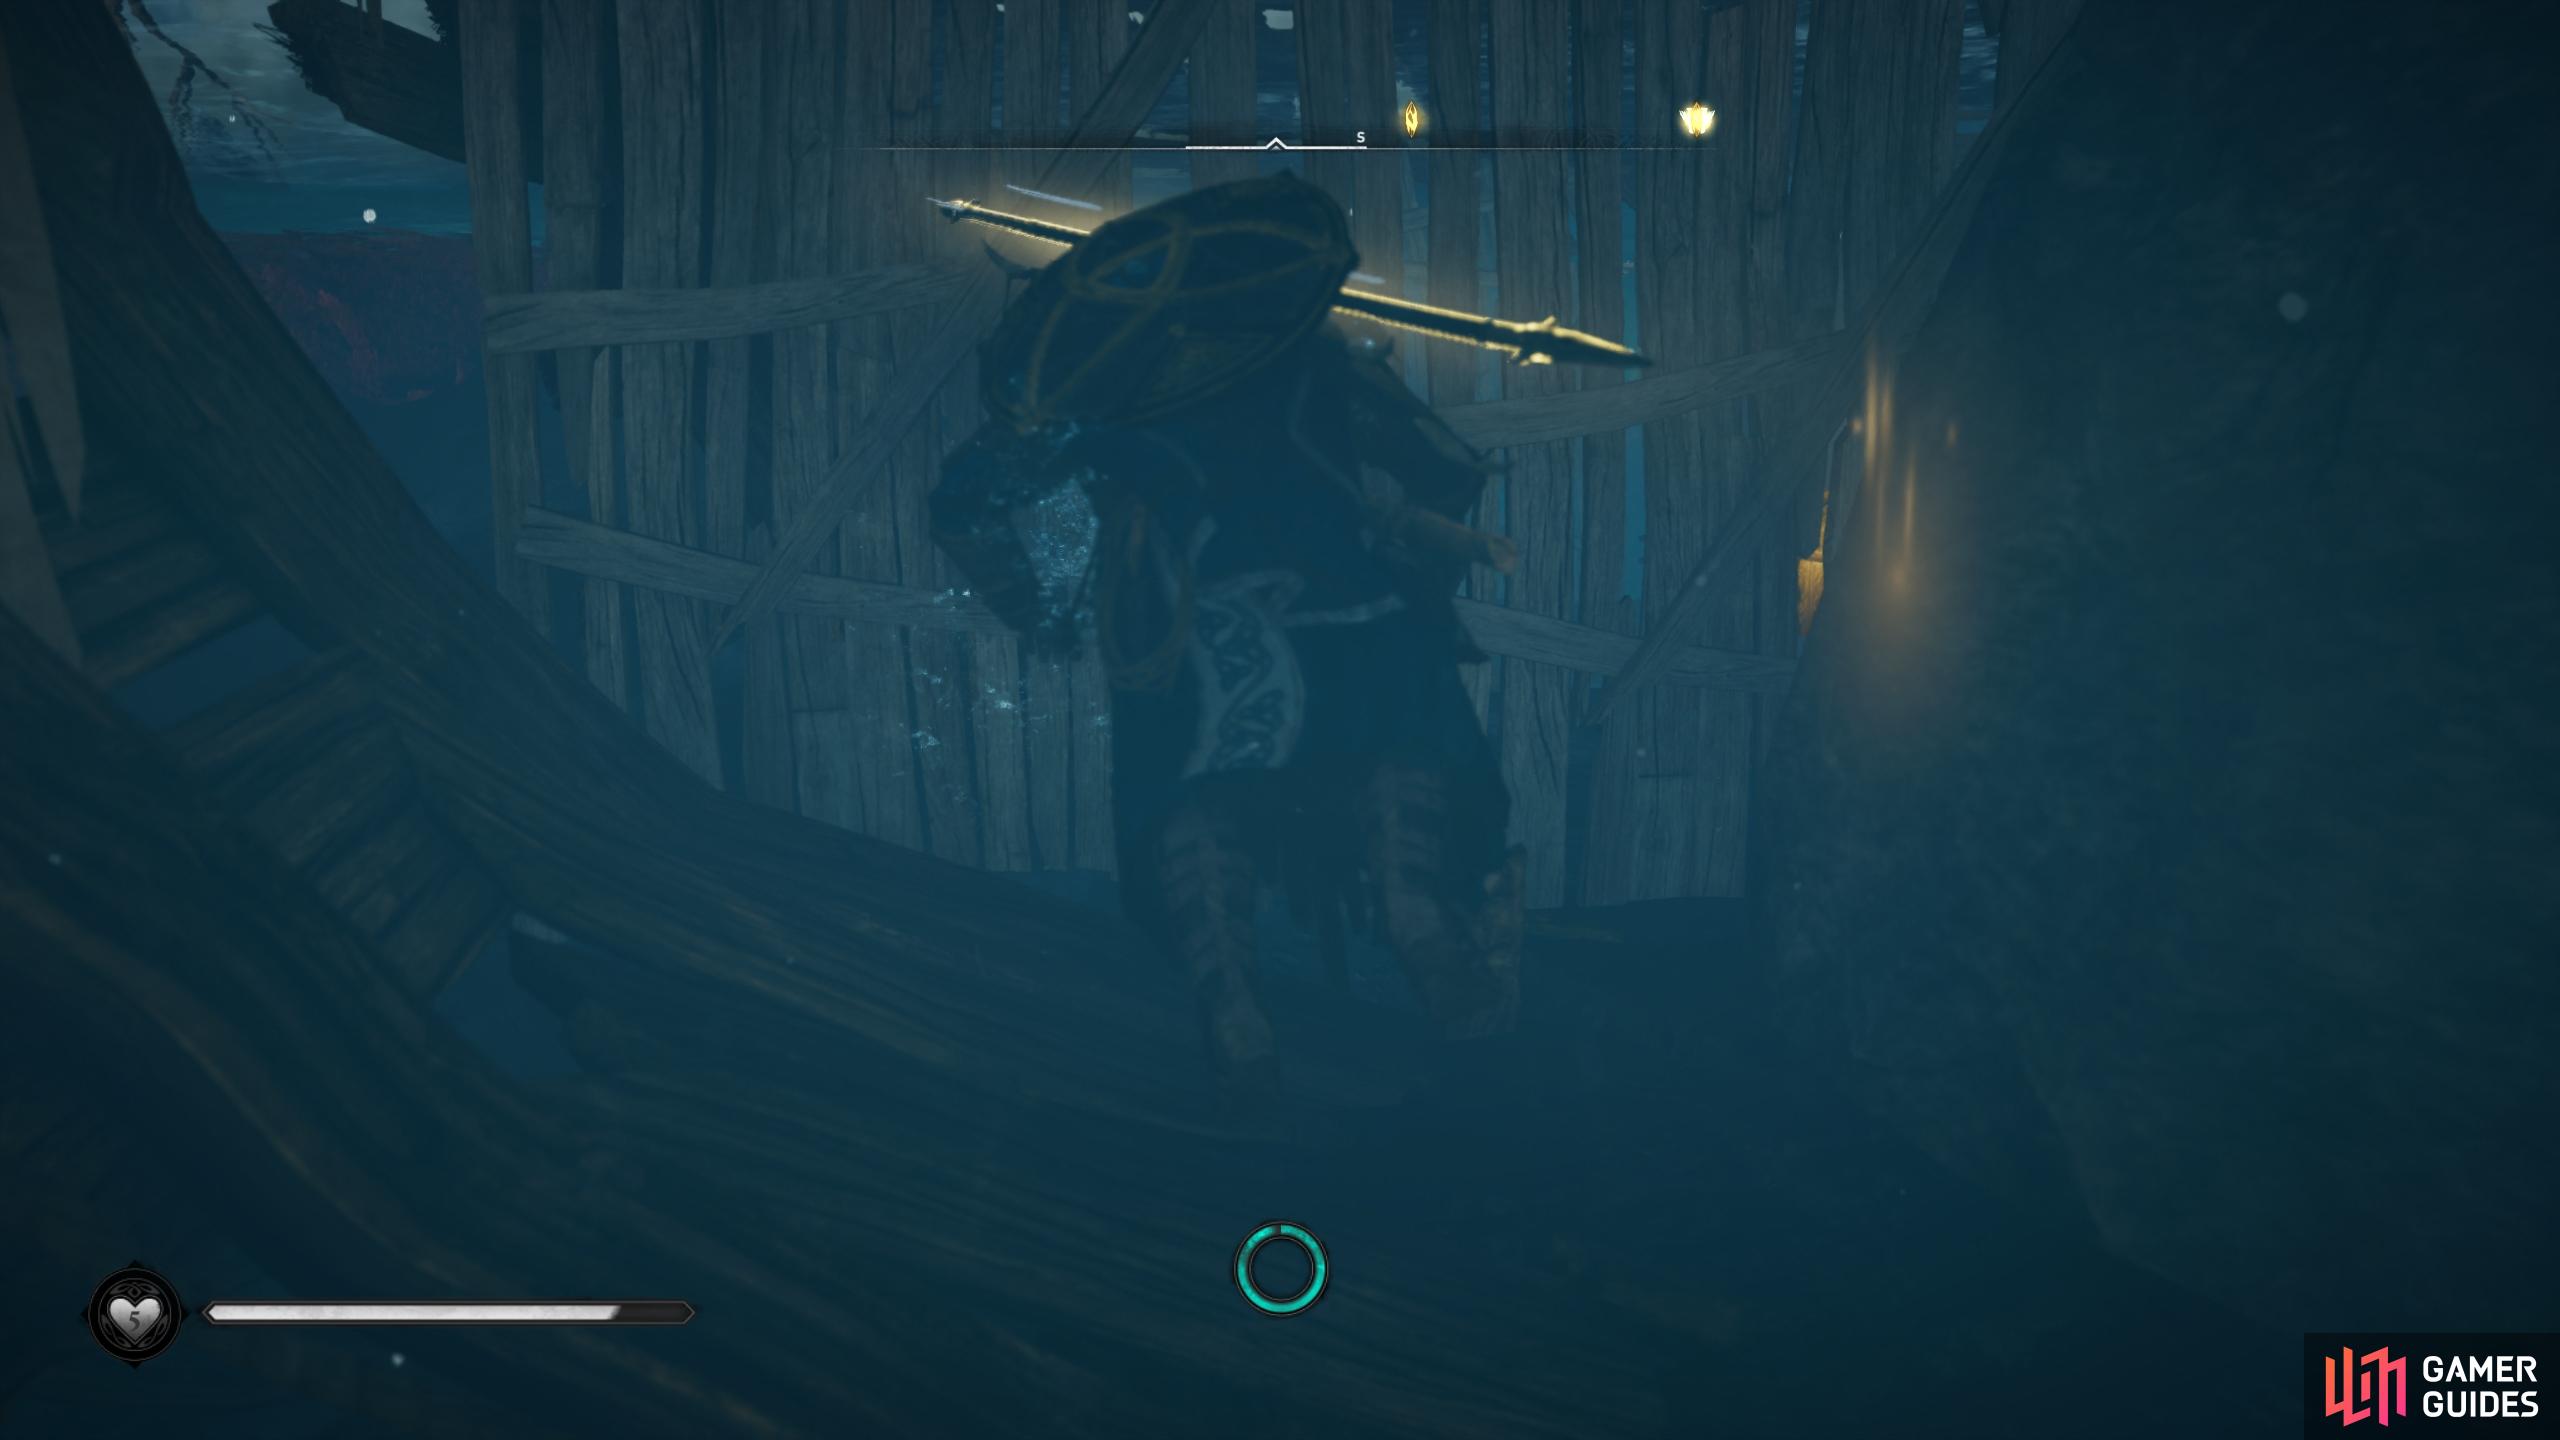 Break the wooden barrier to access the chest in the shipwreck beneath the water.